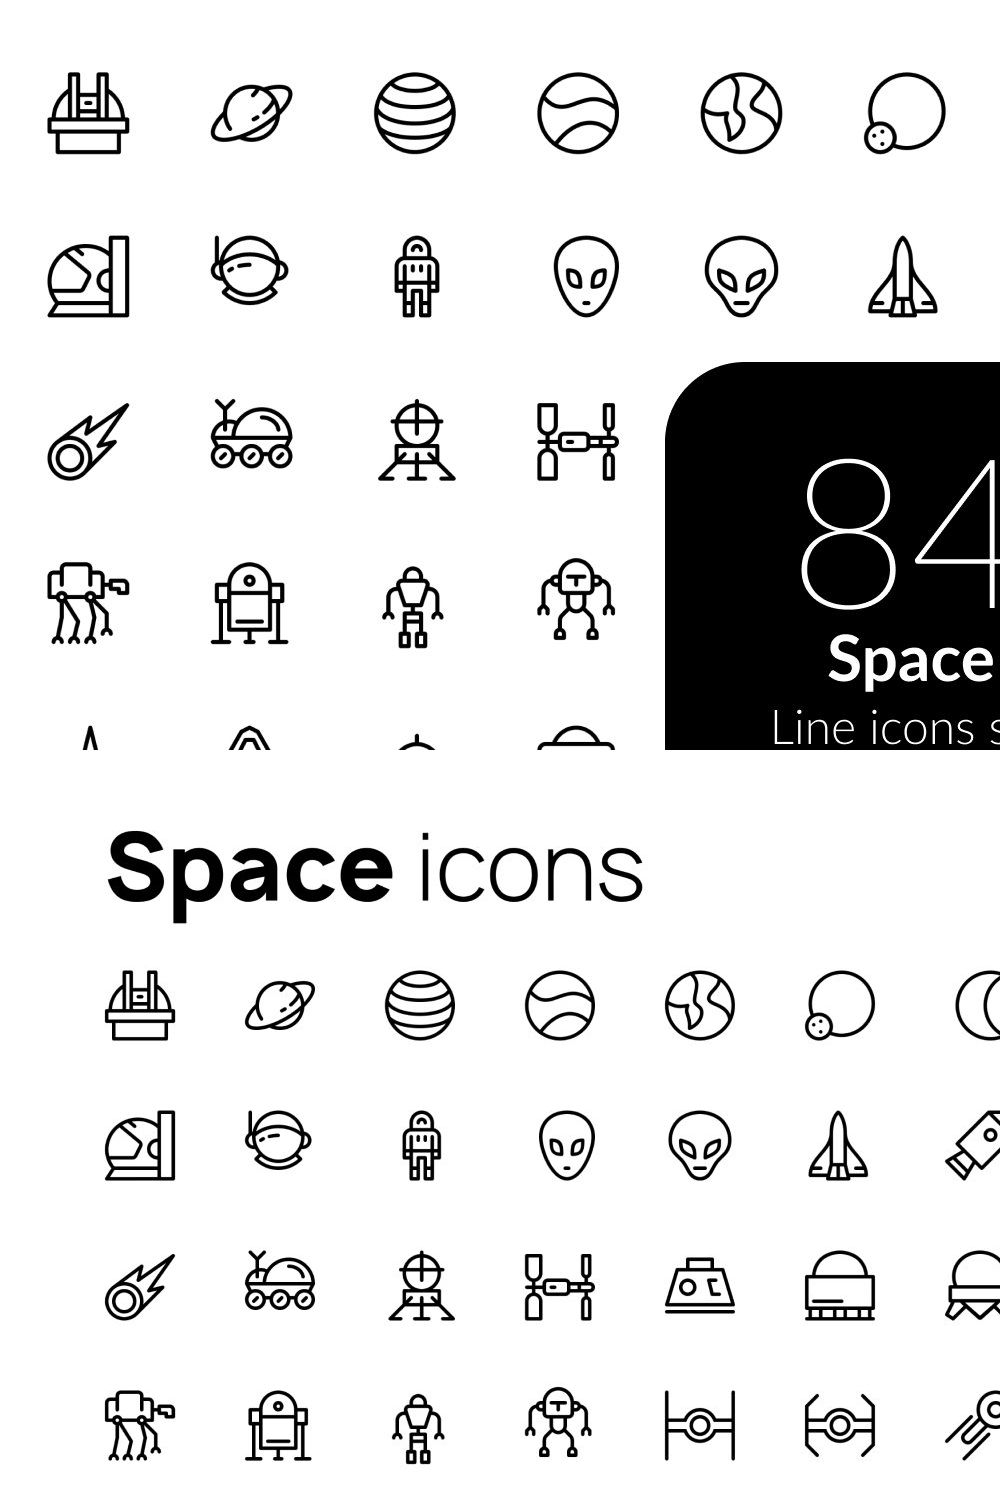 Space line icons set pinterest preview image.